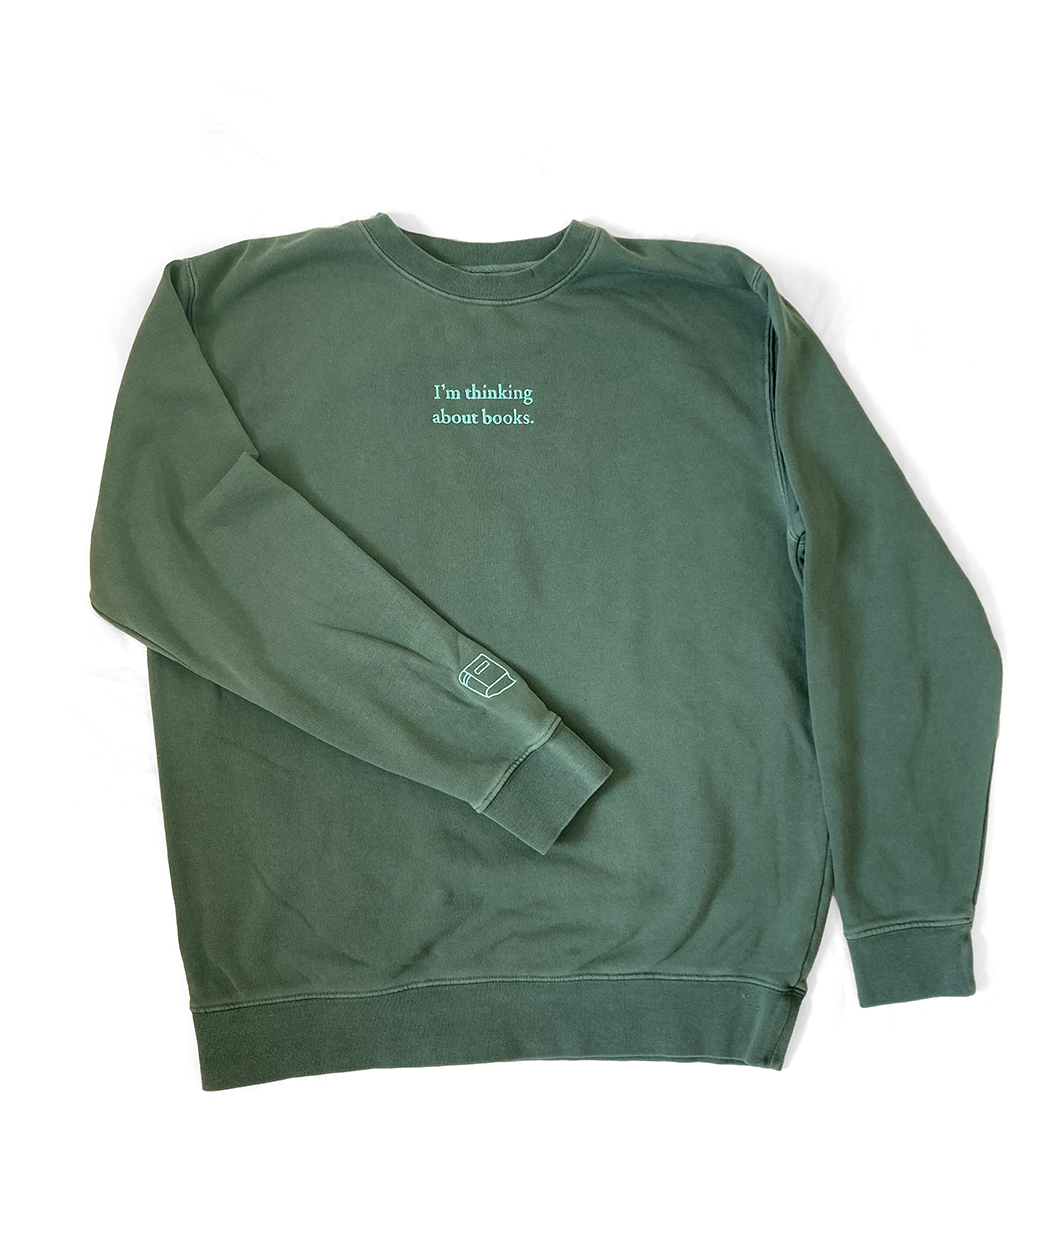 An alpine green sweatshirt with mint green writing on the front center and a small mint green outline of a book on the left sleeve - by Ariel Bissett